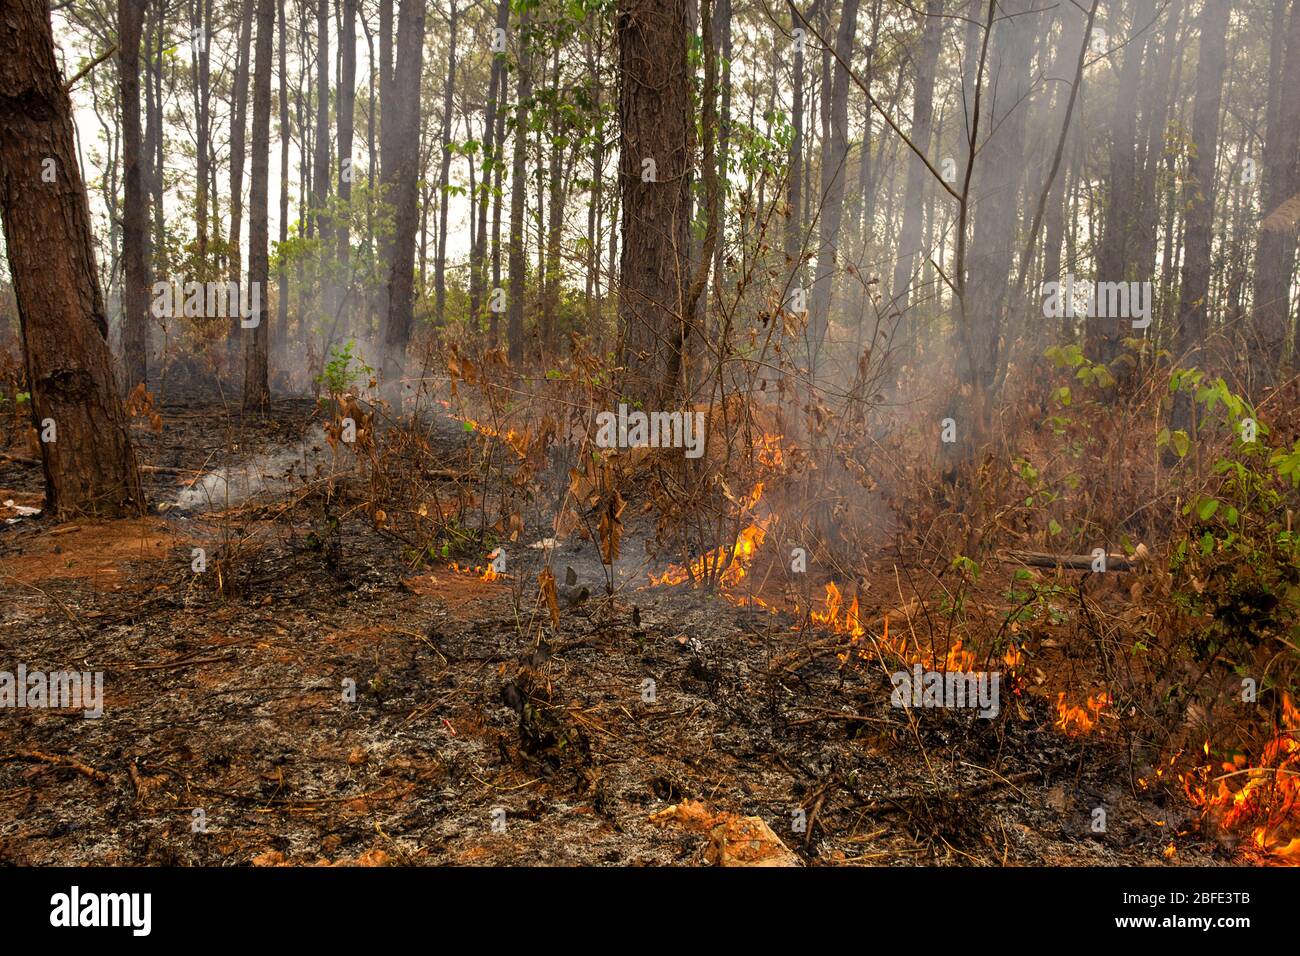 A line of fire of small flames burn through a fuel of old leafs and small plants on a forest floor. Stock Photo